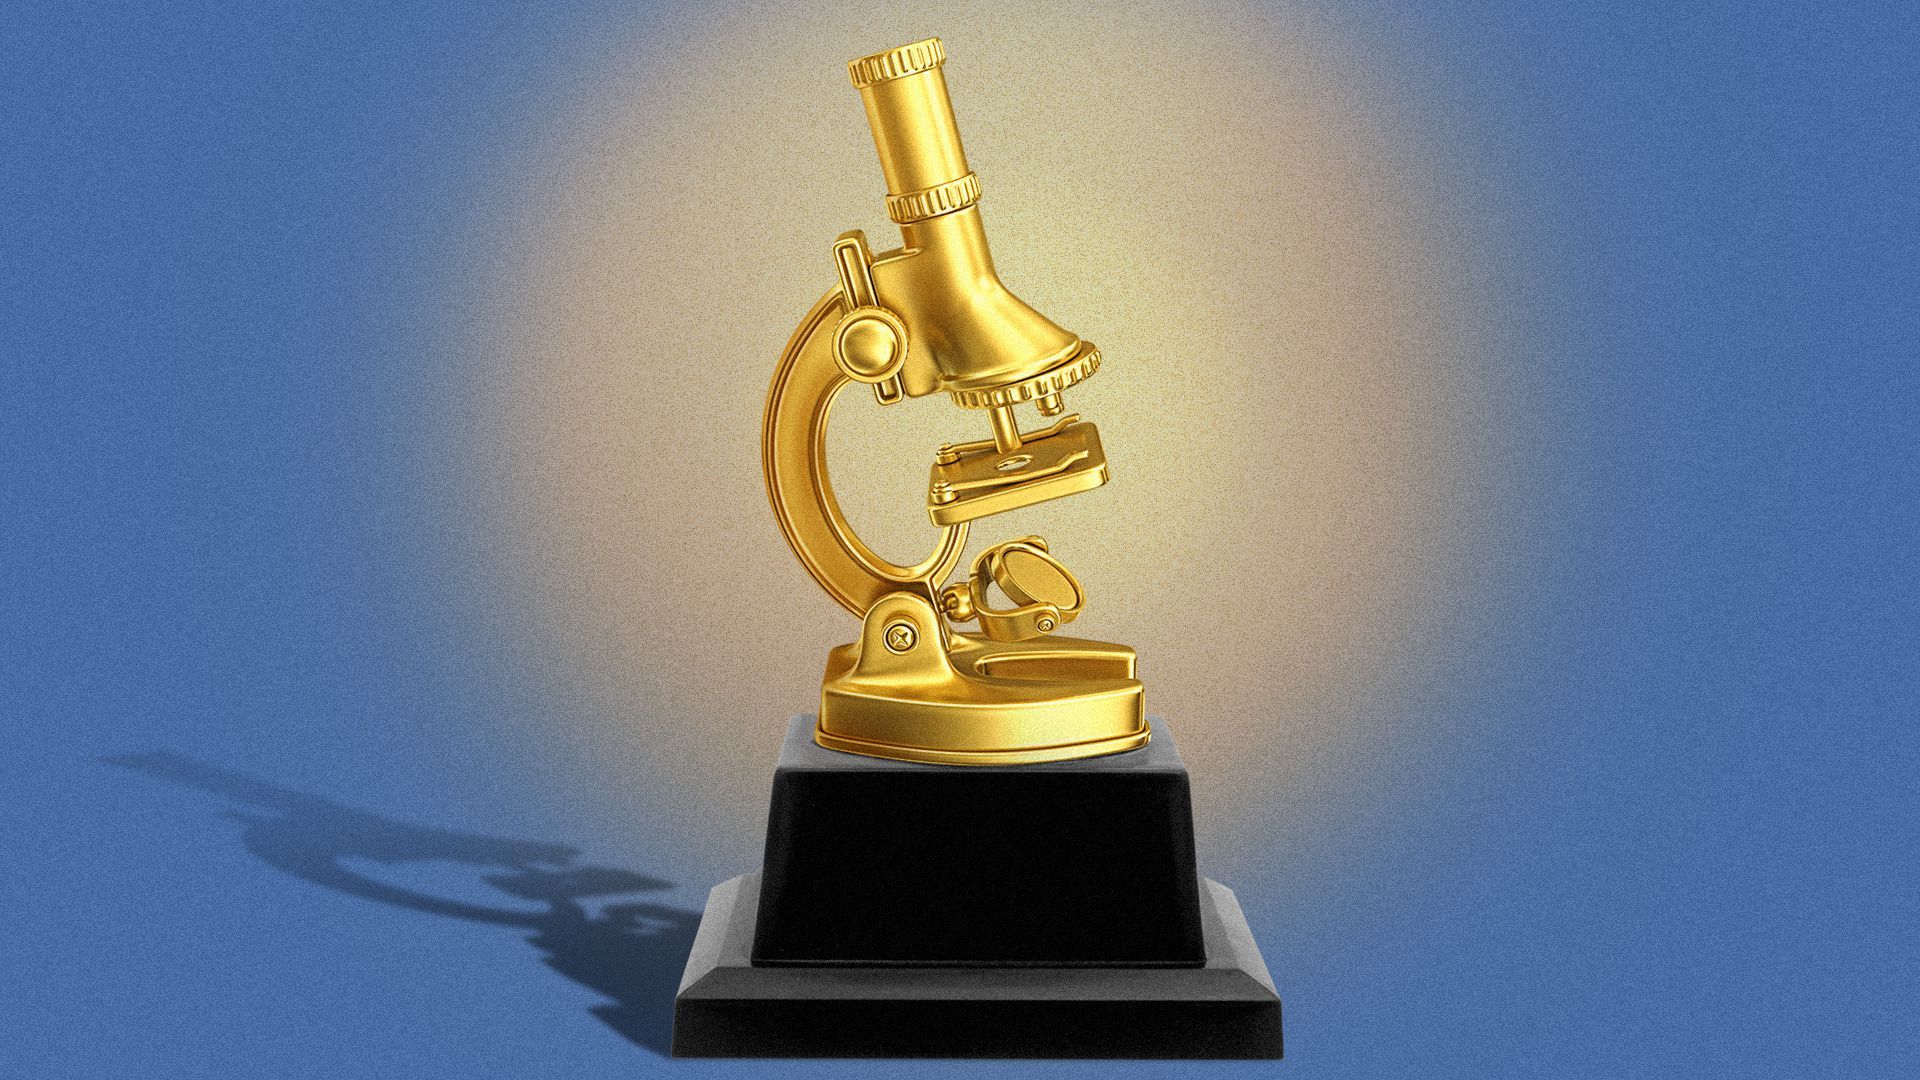 Illustration of a golden microscope trophy.